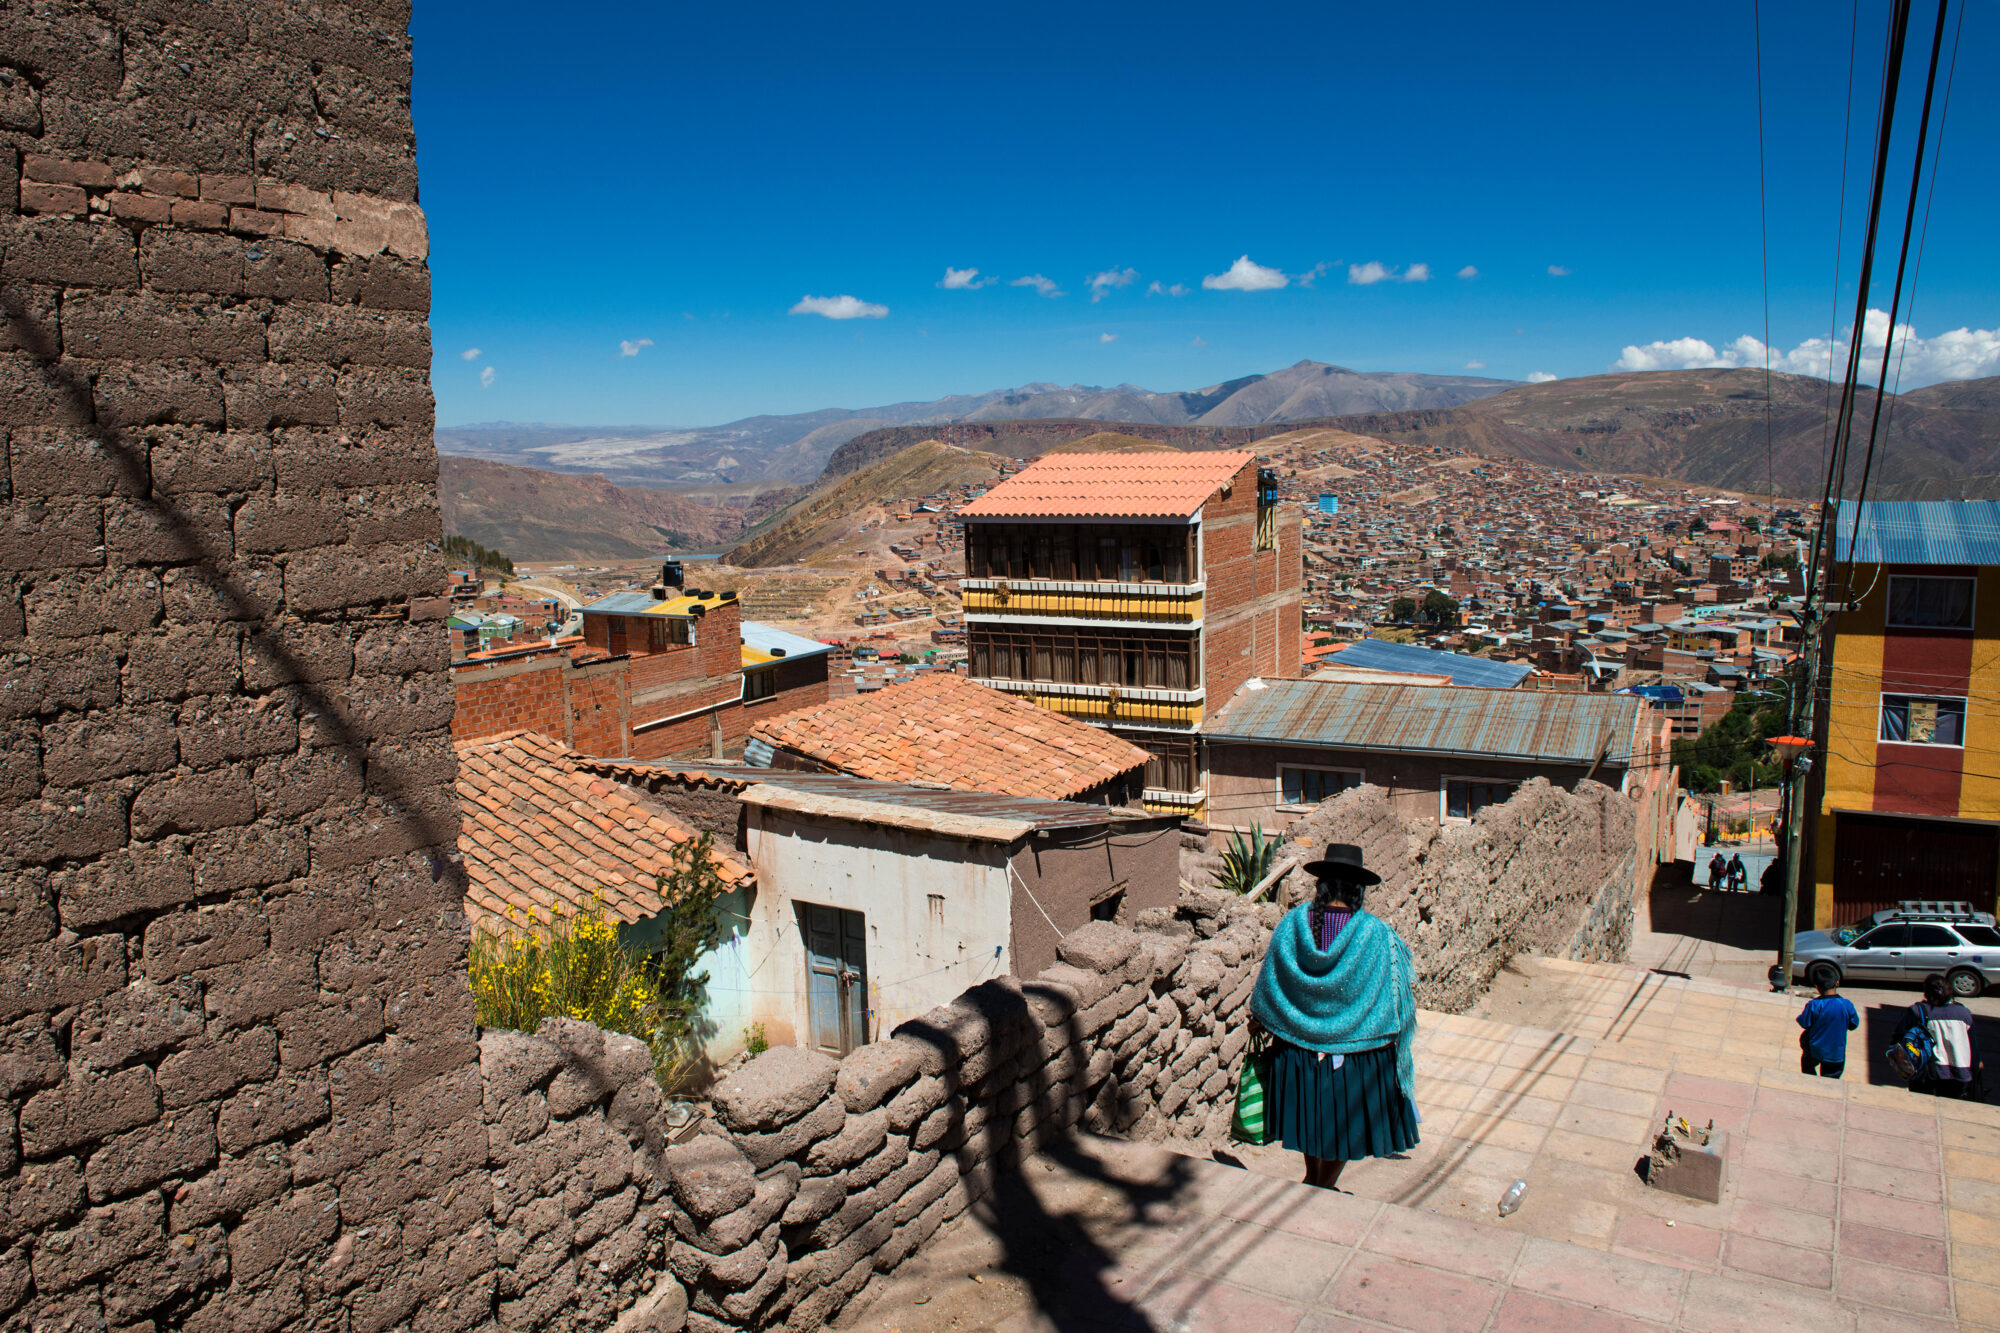 <p>Some residents in the high-altitude city of Potosí, pictured, and its surrounding department complain of isolation from the rest of Bolivia. There are hopes that a proposed road, the Tinku Integration Highway, may bring increased connectivity (Image: Tiago Fernandez / Alamy)</p>